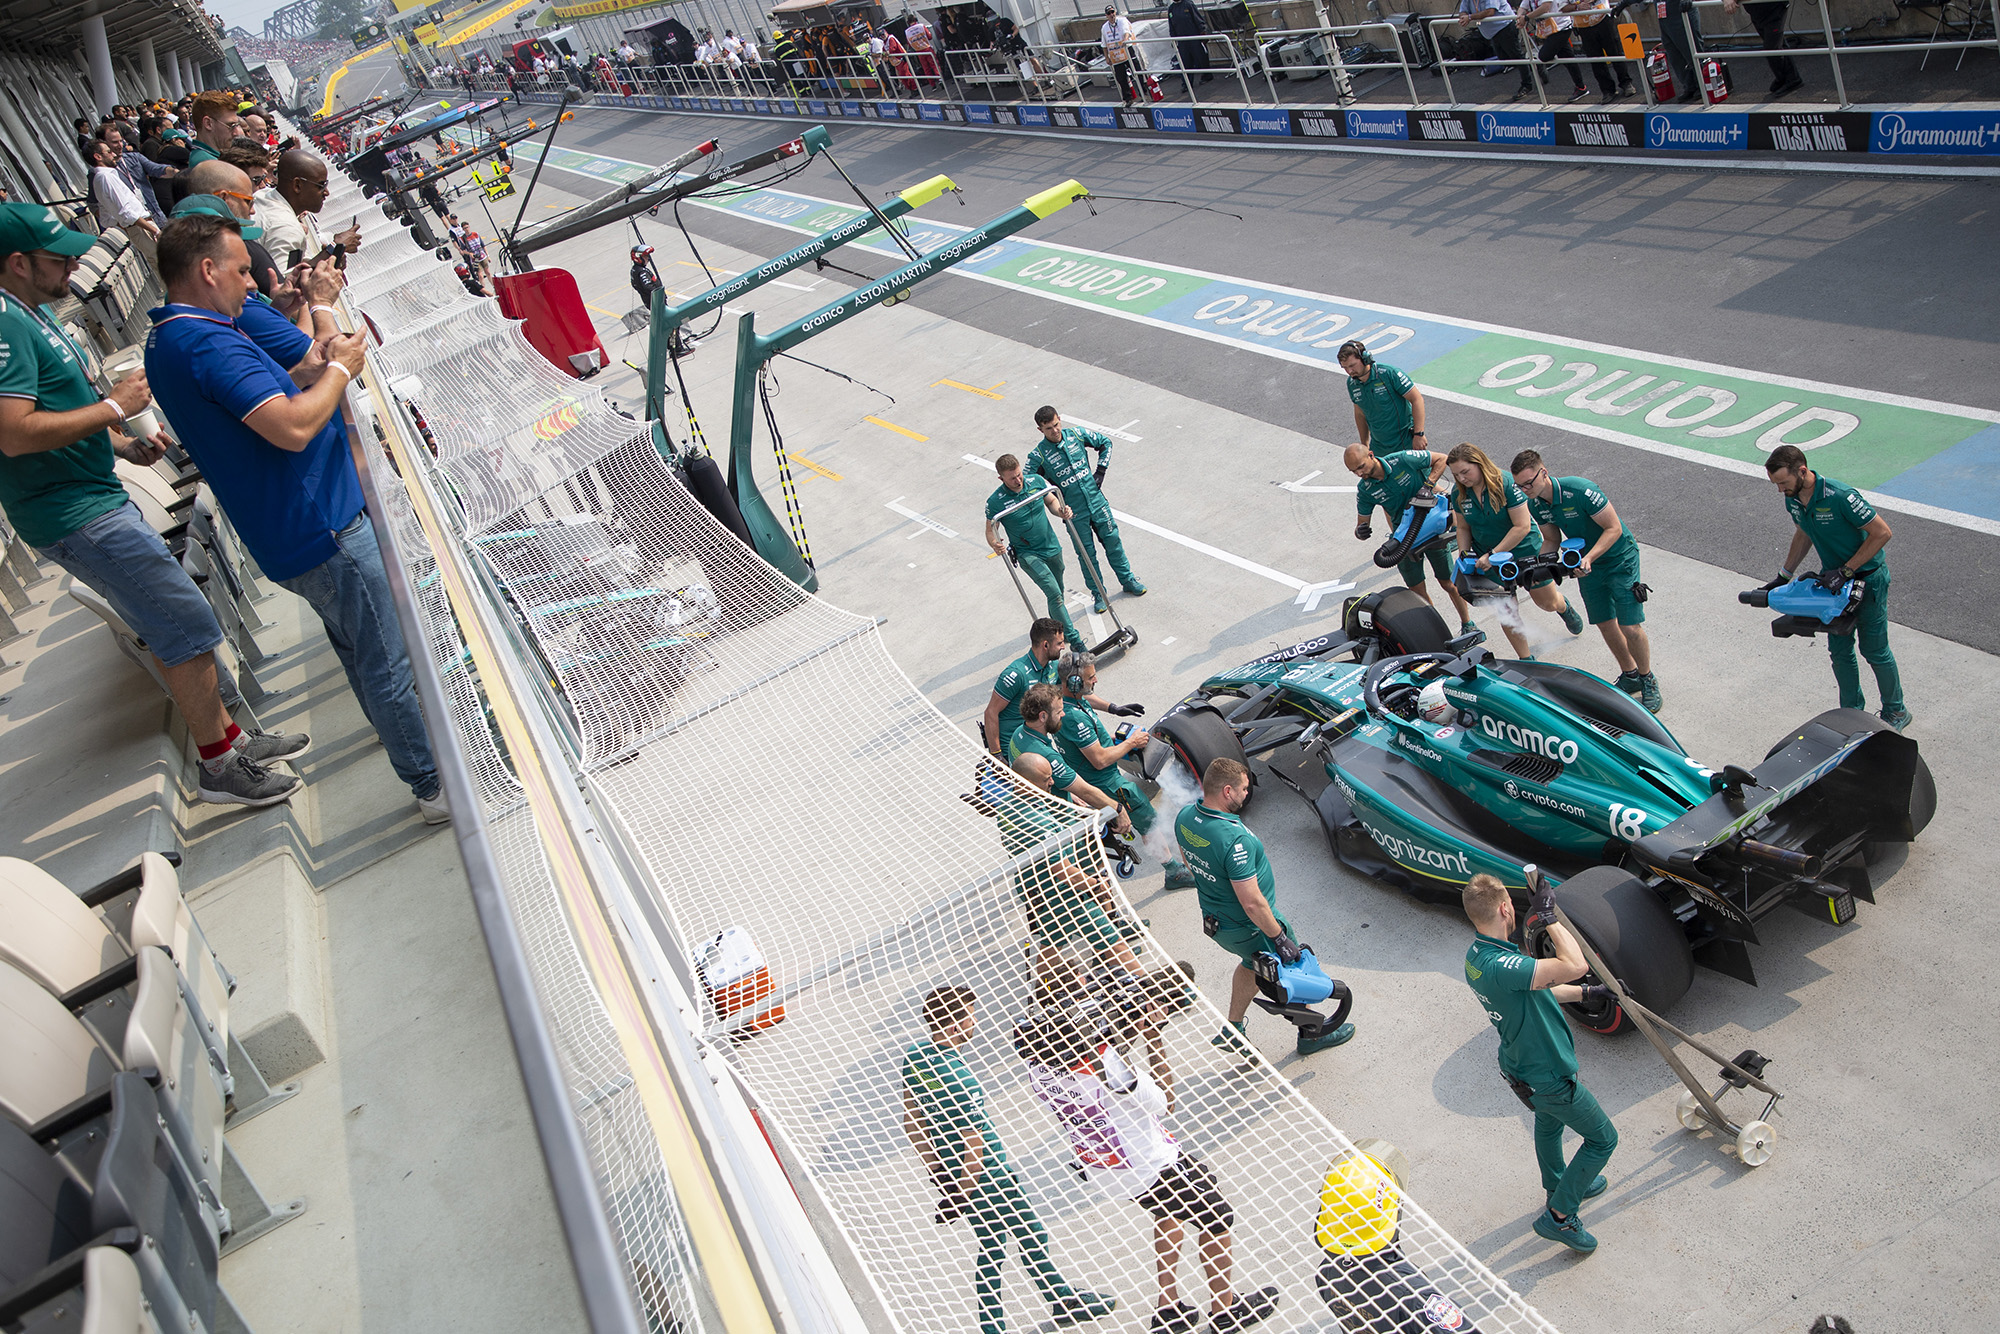 Canadian Grand Prix Race pit stop during race